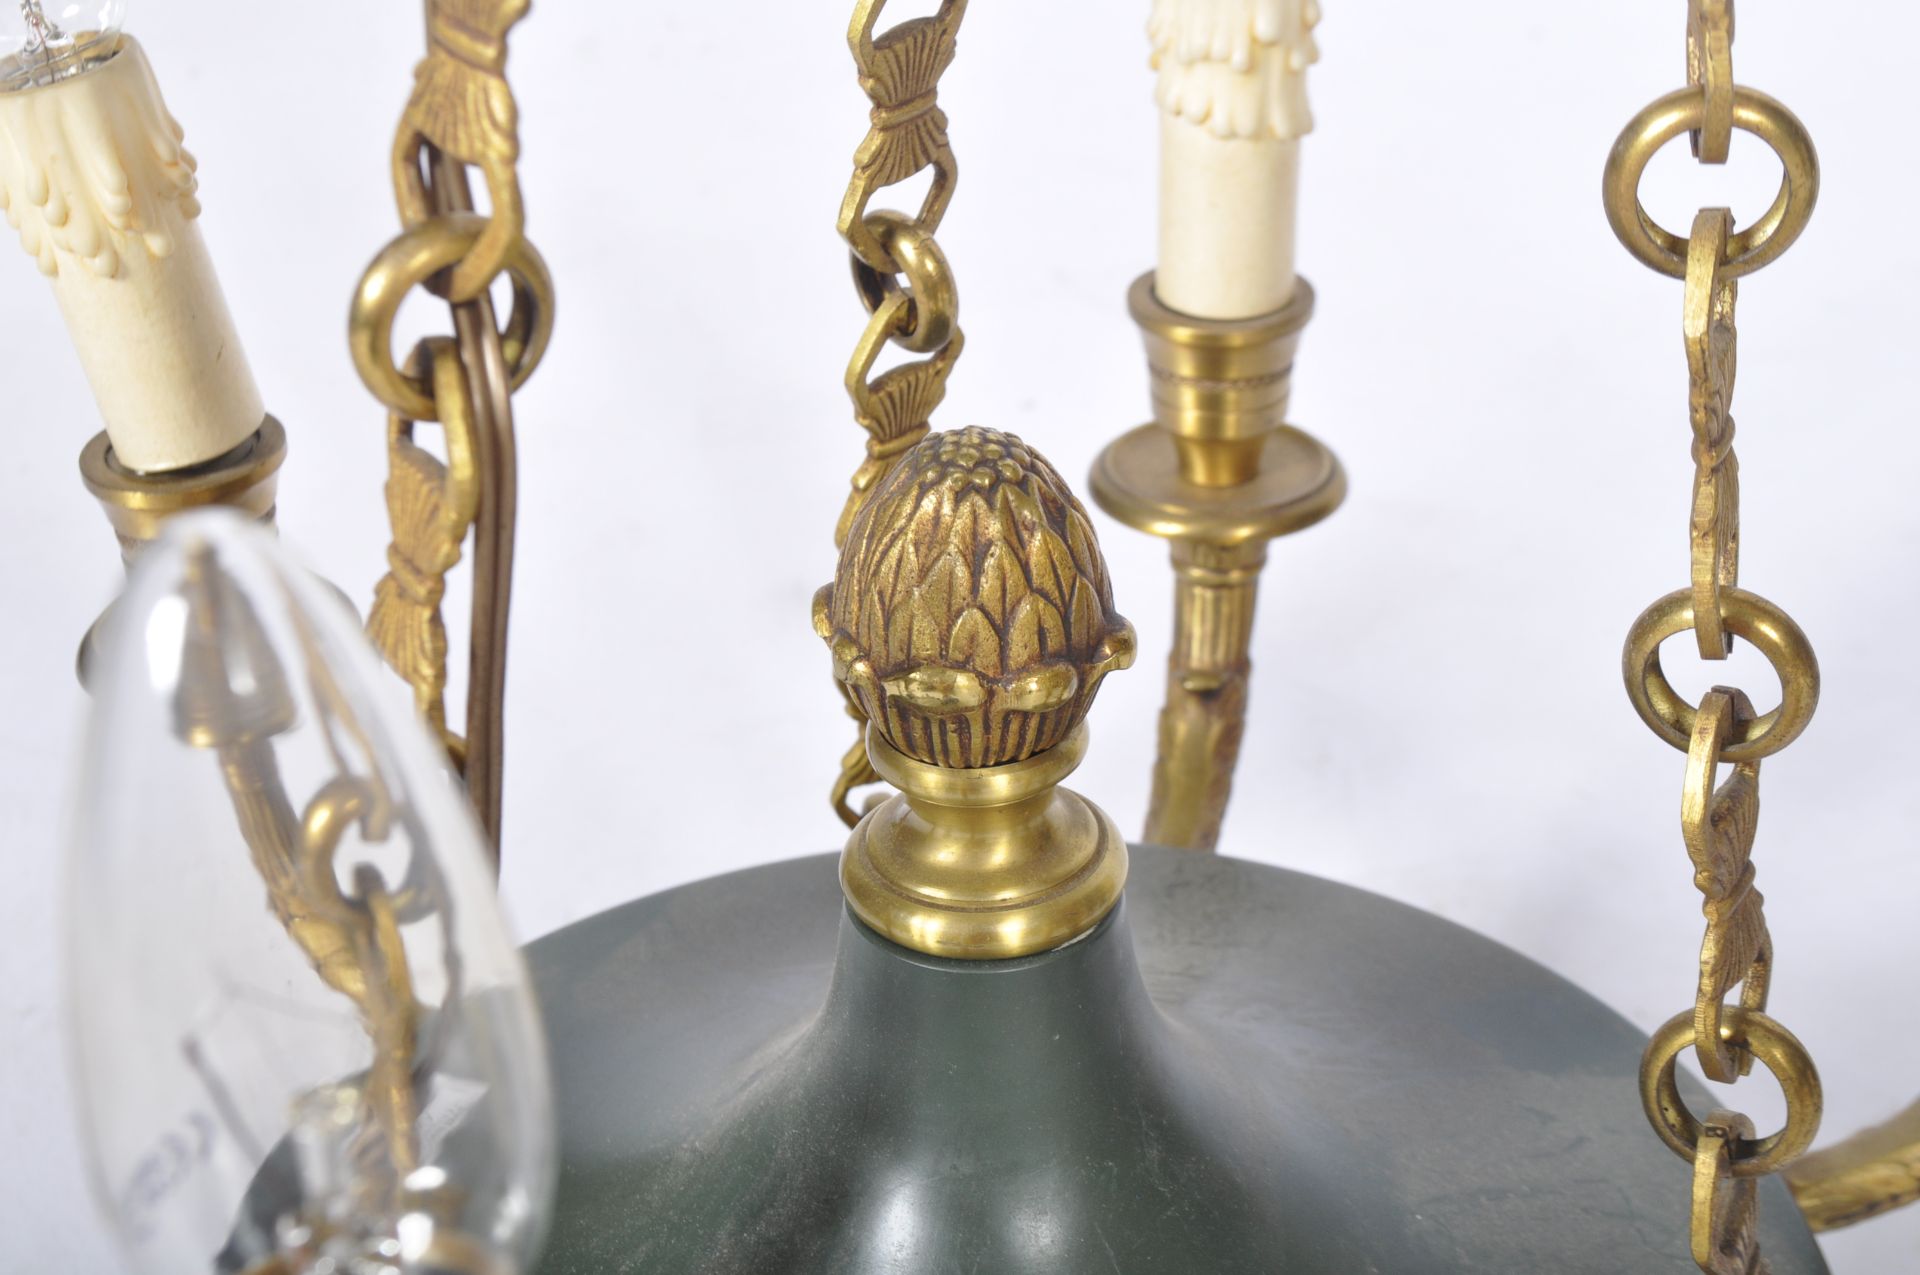 EARLY 20TH CENTURY FRENCH EMPIRE CEILING LIGHT - Image 5 of 5